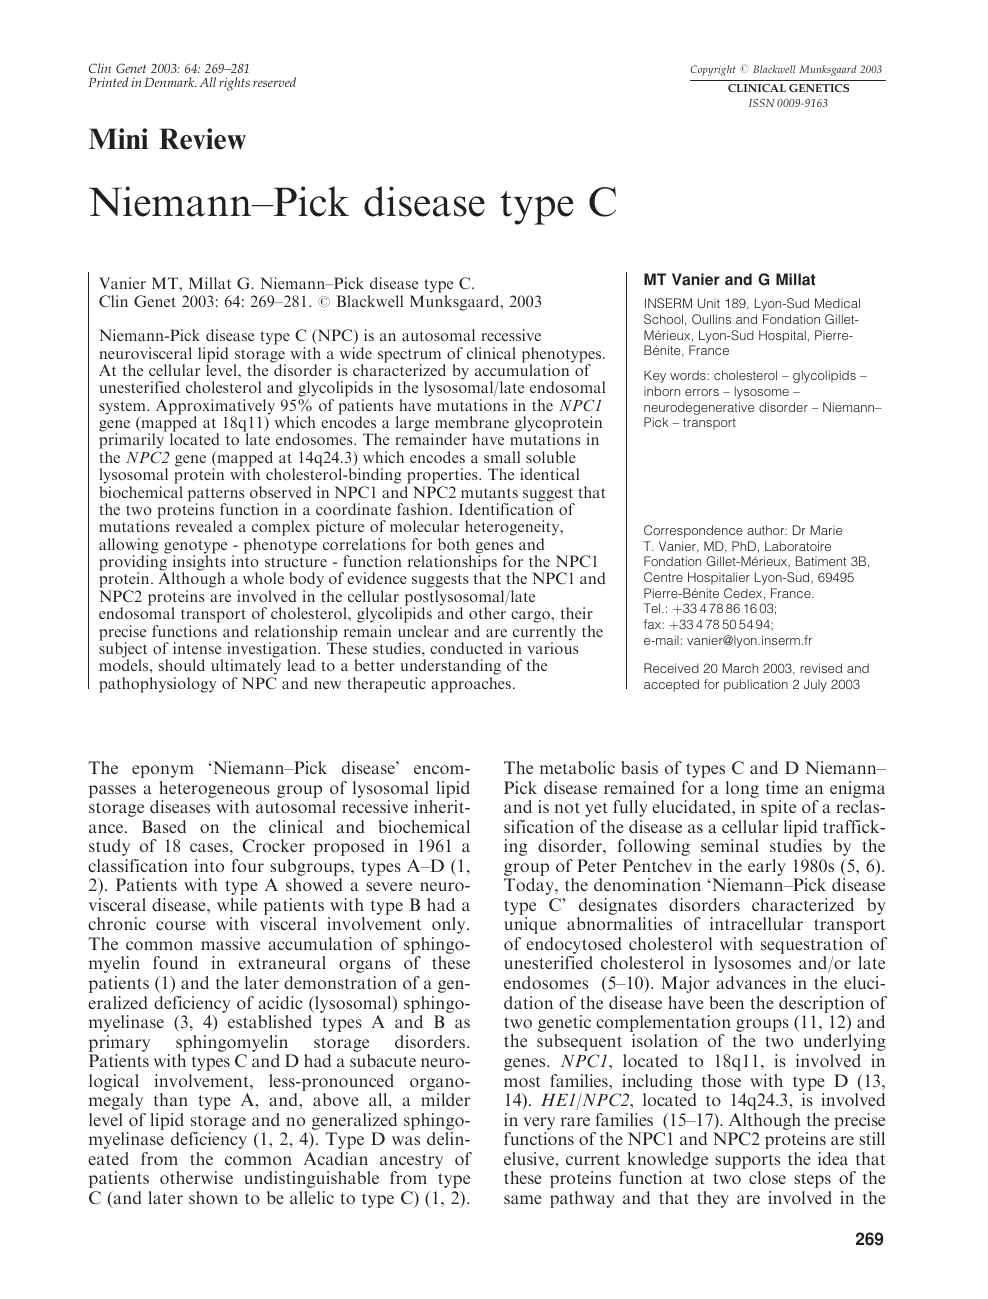 Diagnostic and predictive methods for a Niemann-Pick disease type